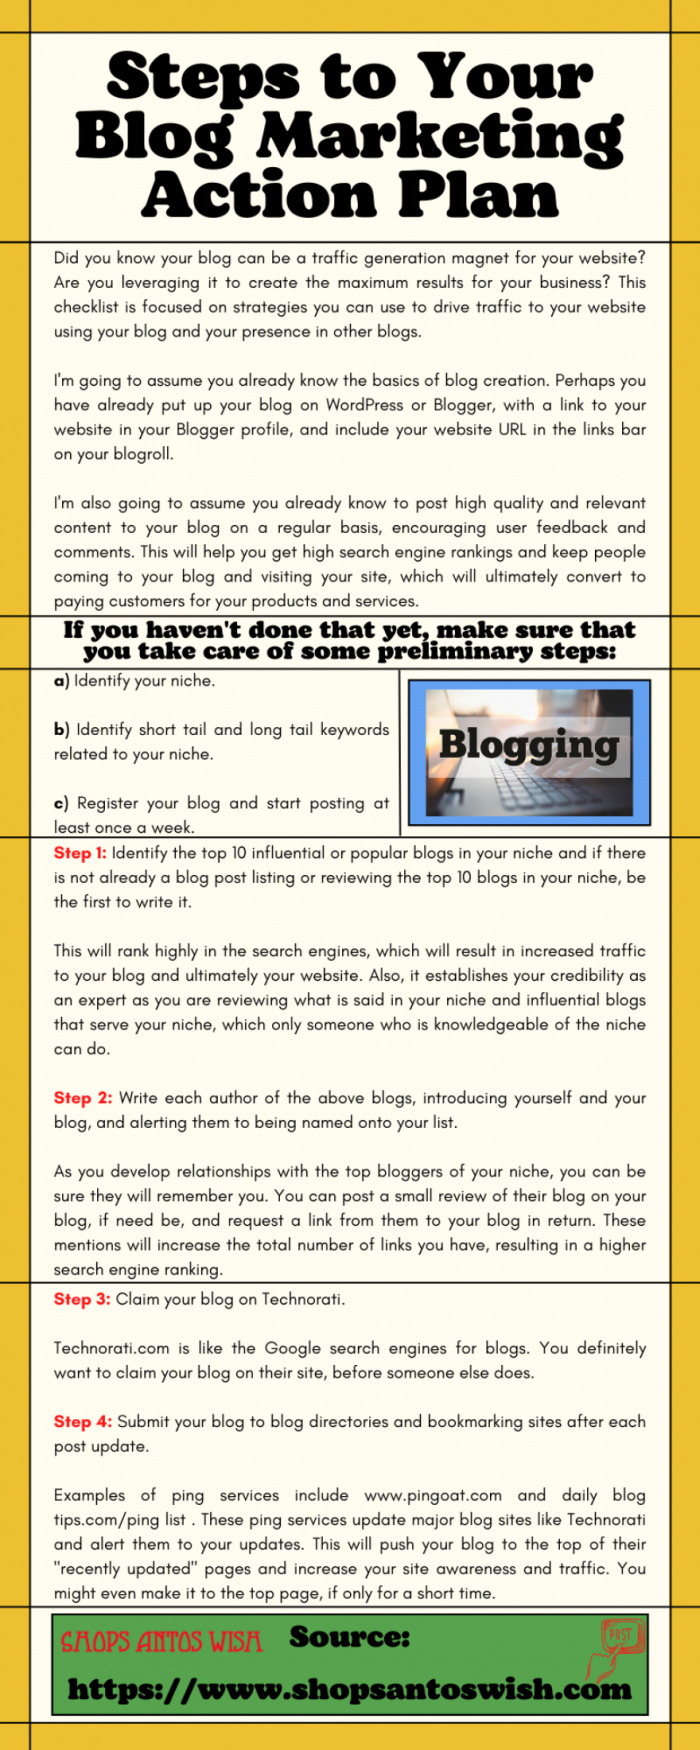 How to make Blog Marketing Action Plan